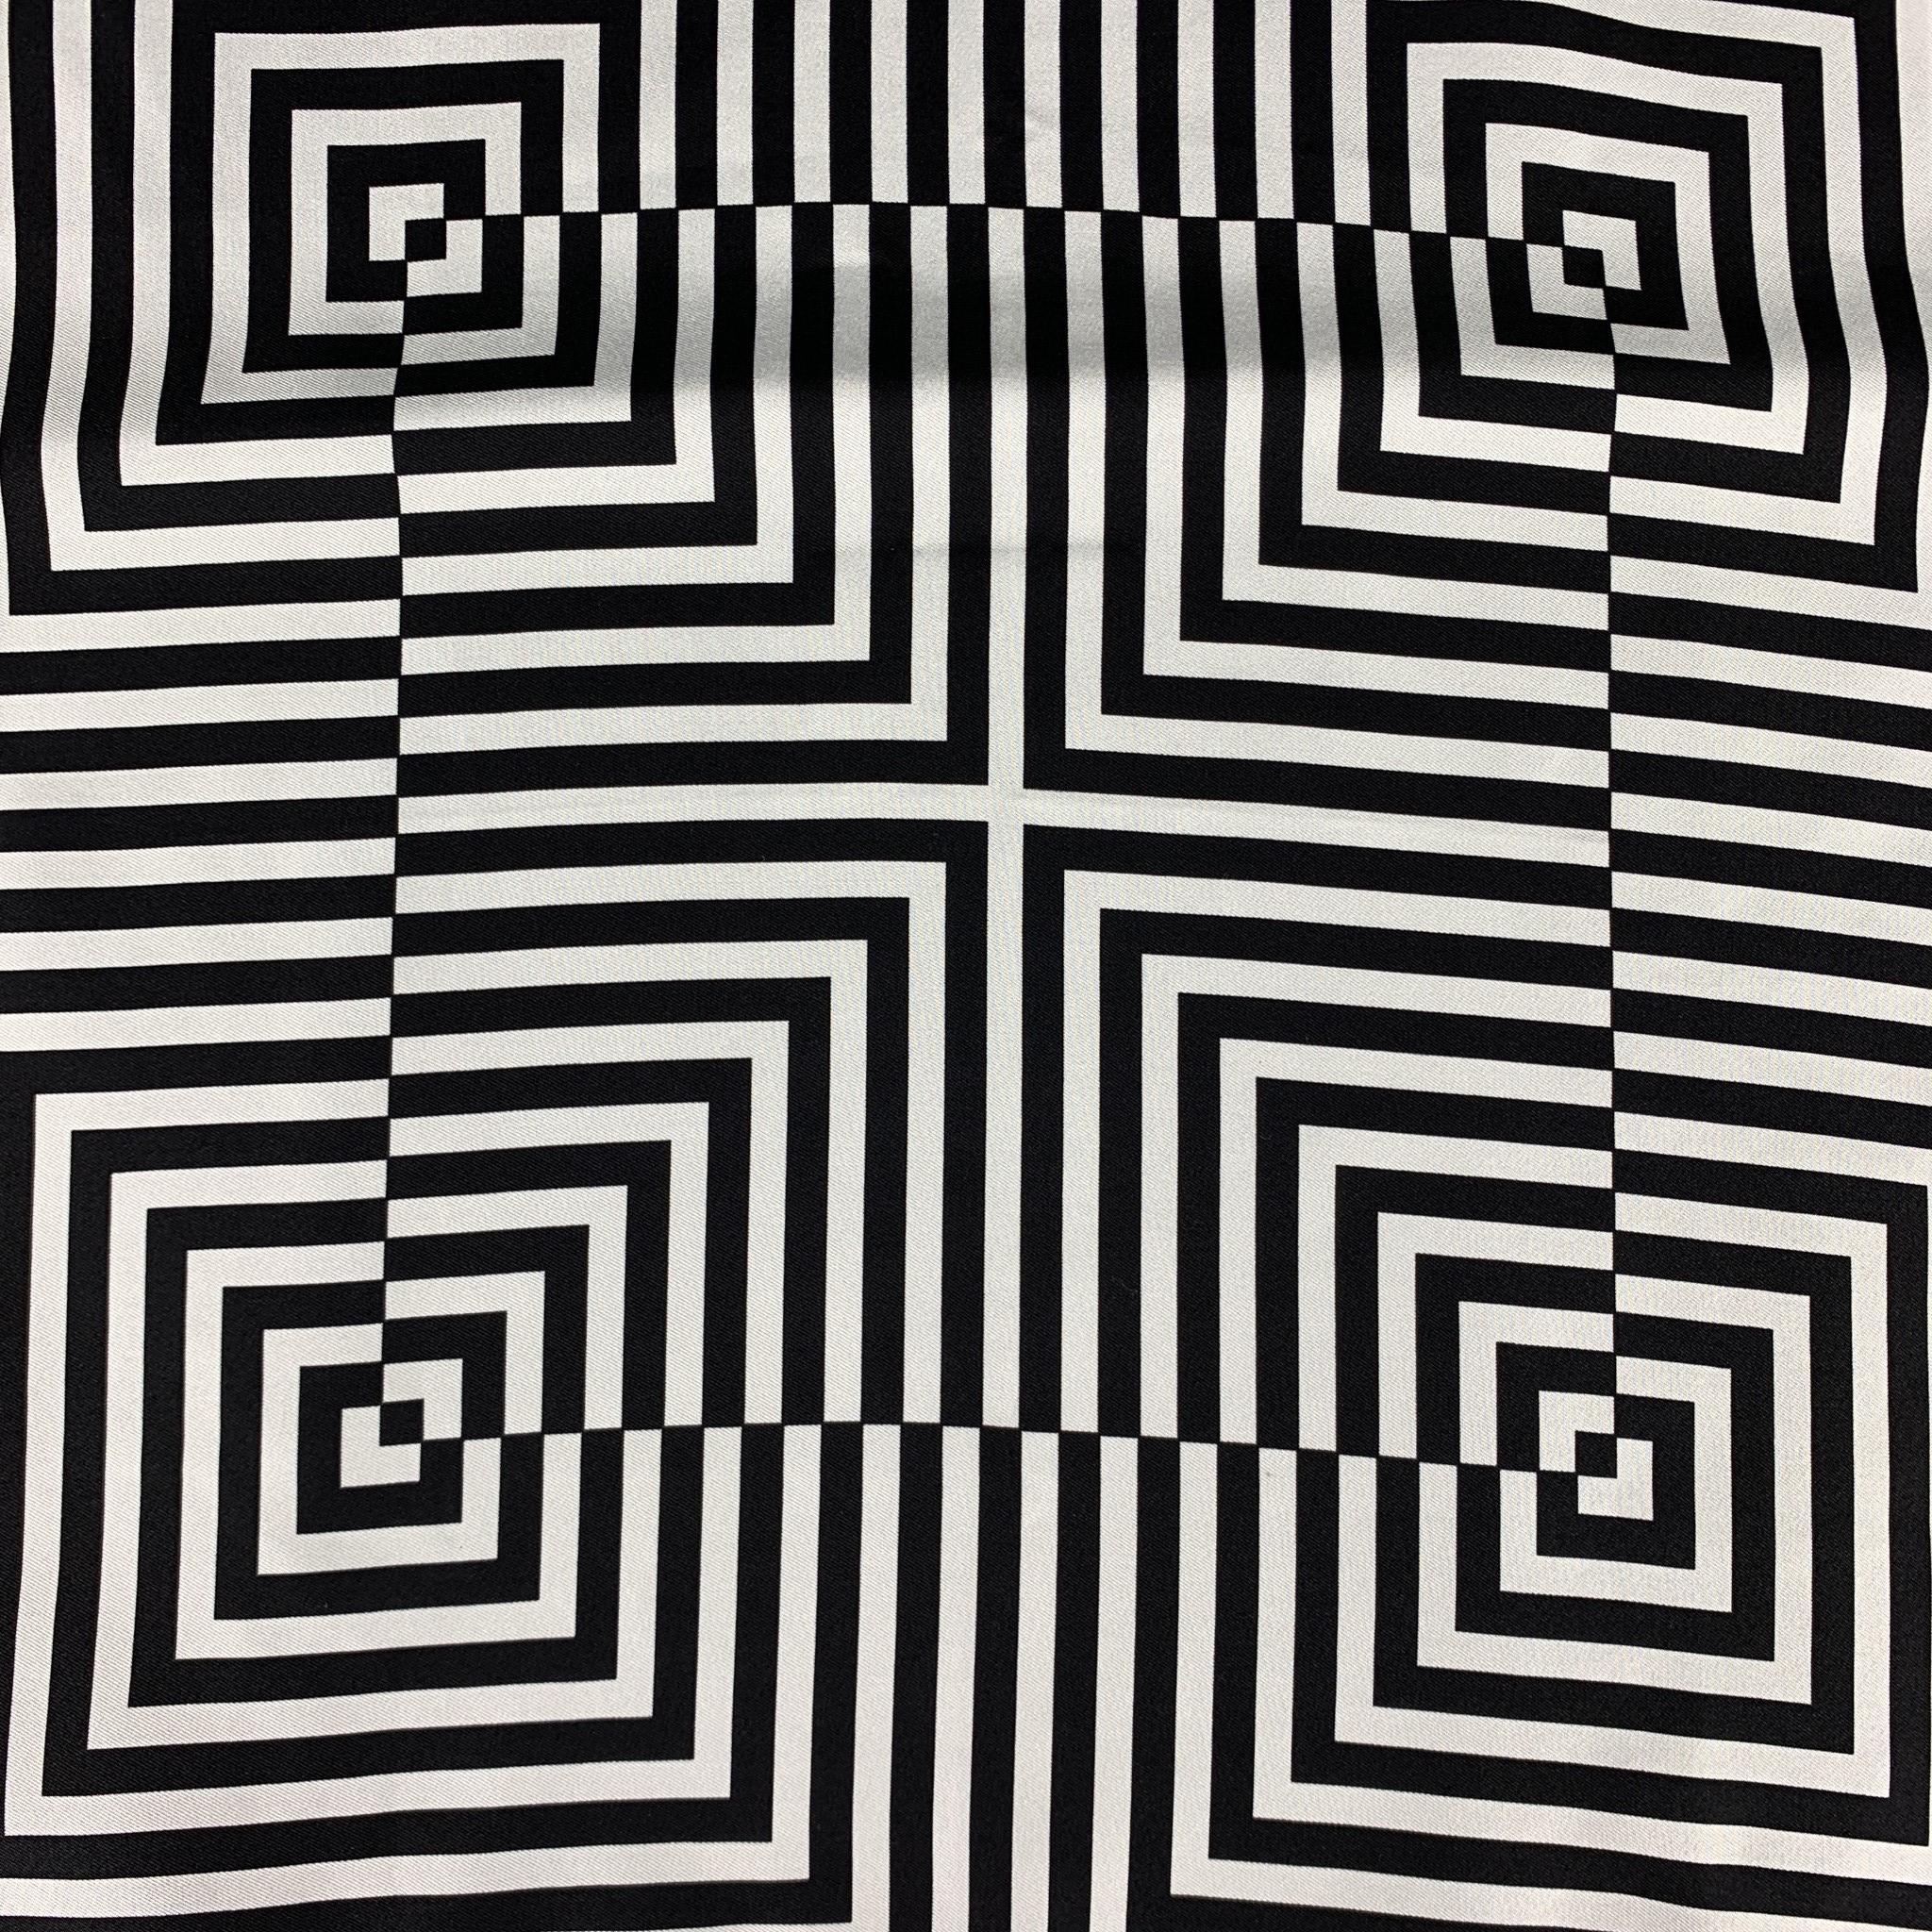 TOM FORD pocket square comes in a black & white optical square print silk. Made in Italy.

Excellent Pre-Owned Condition.
Original Retail Price: $190.00

Measurements:

15.5 in. x 15 in.  